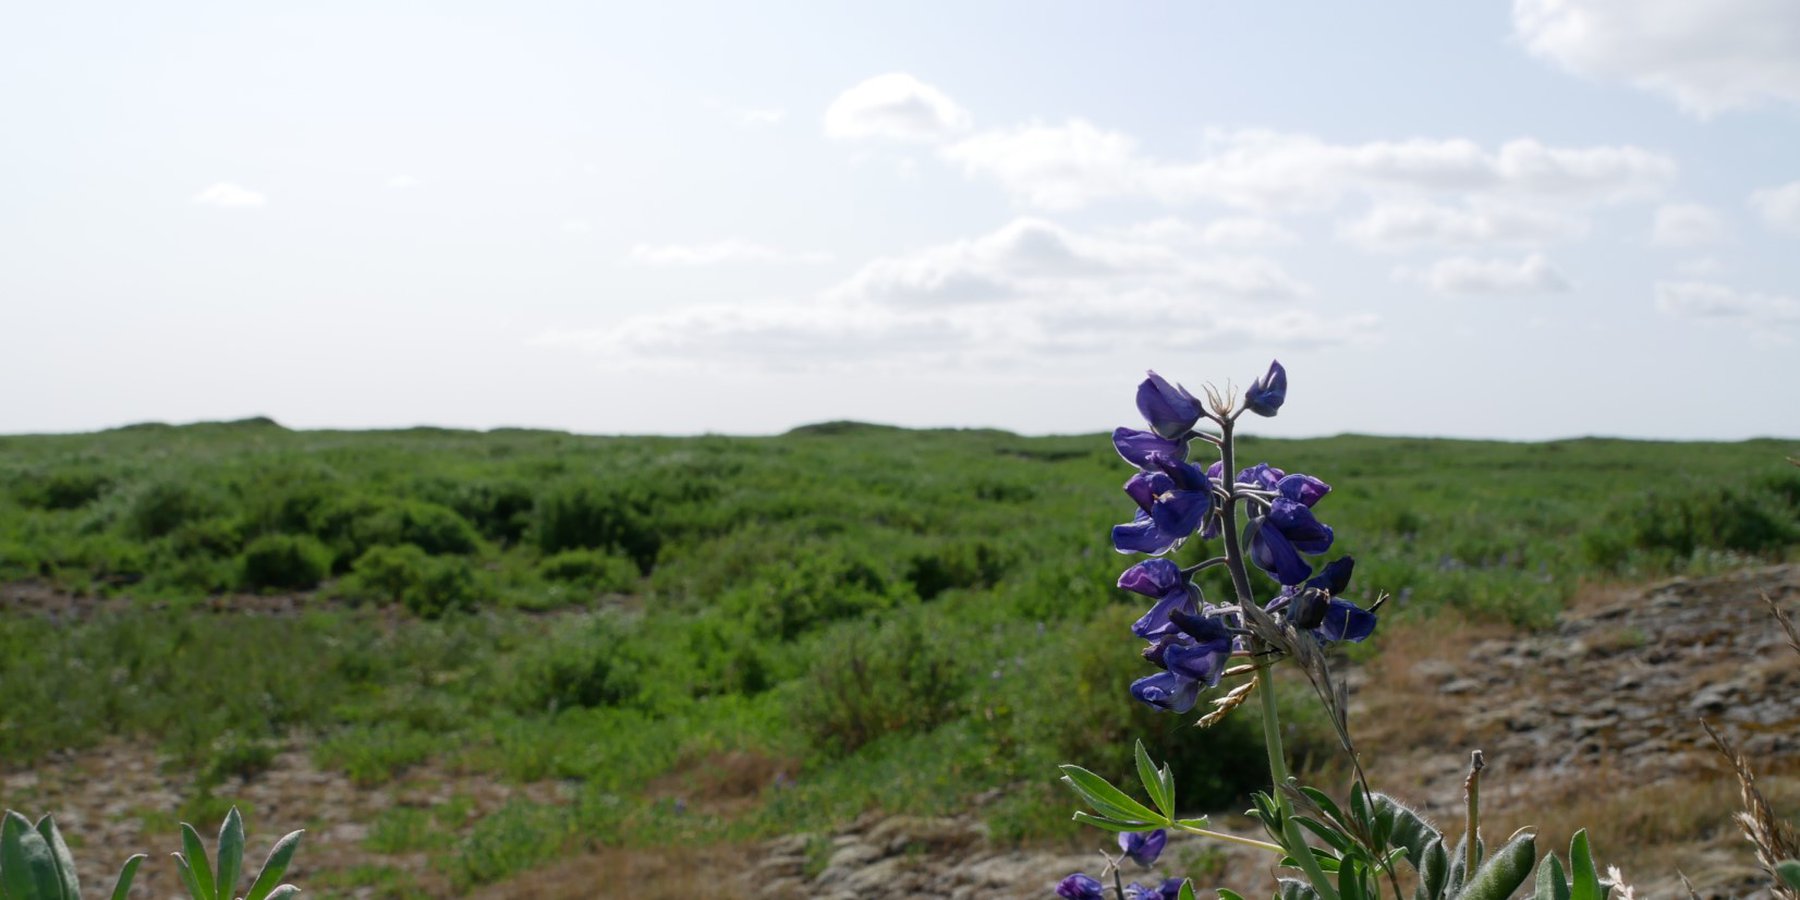 The picture shows the flower of the lupine, which is used for land reclamation in Iceland (see background).